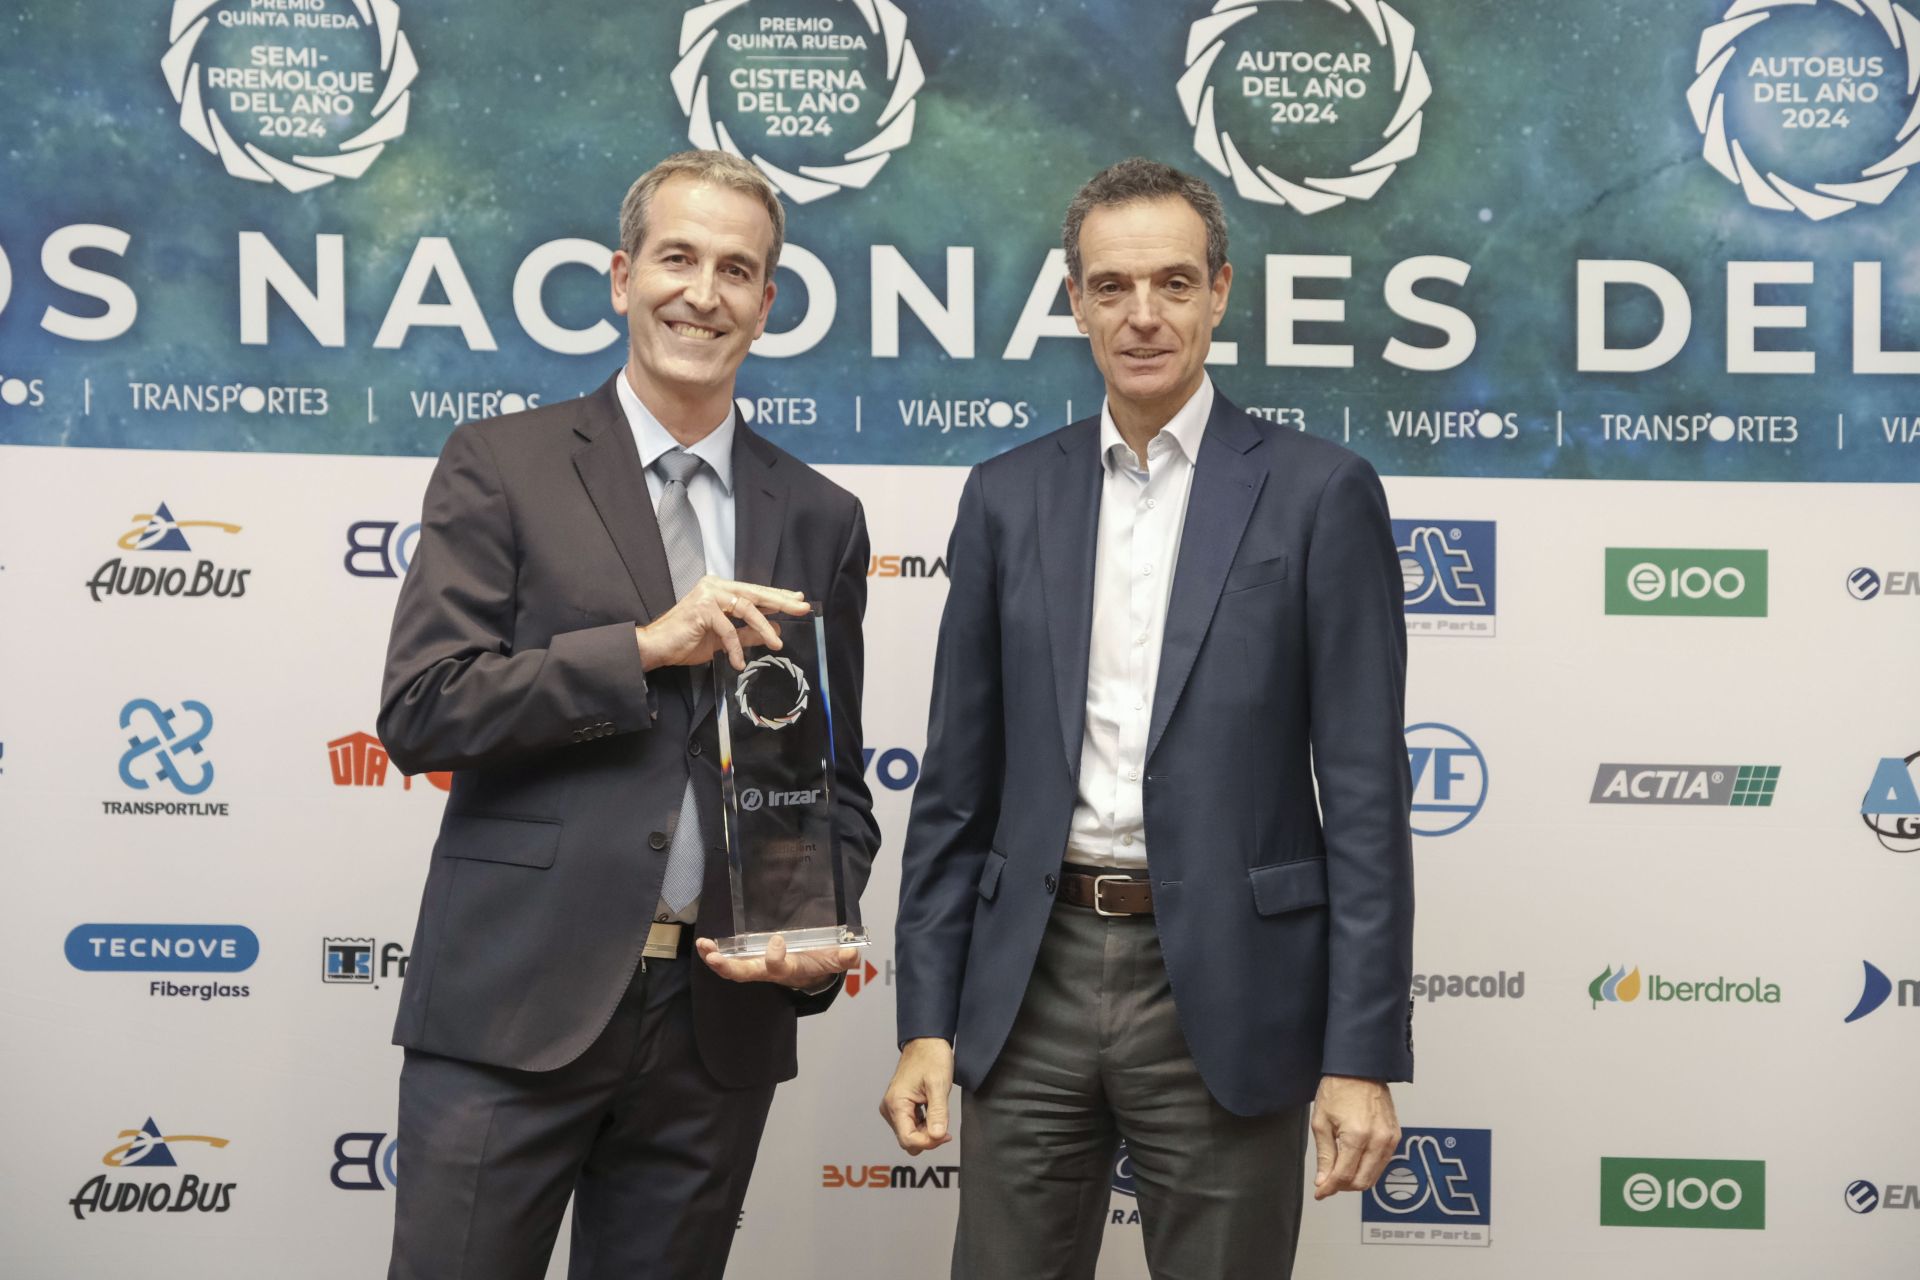 Irizar i6S Efficient Hydrogen 2024 Coach of the Year in Spain